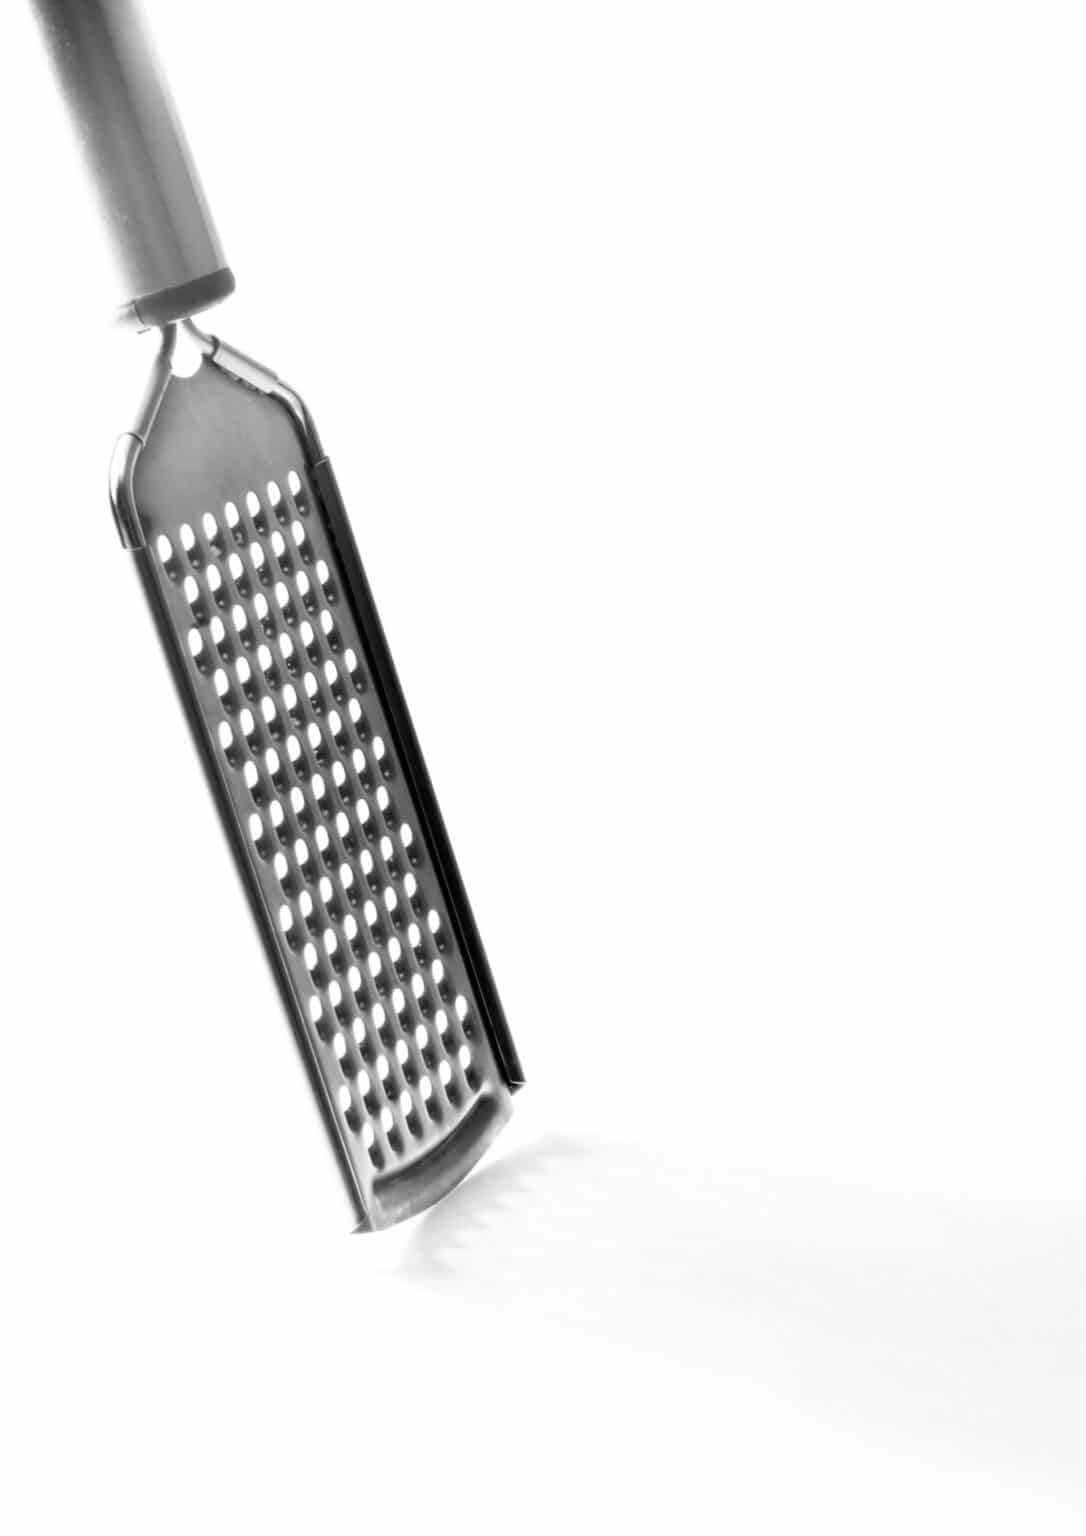 Stainless steel grates